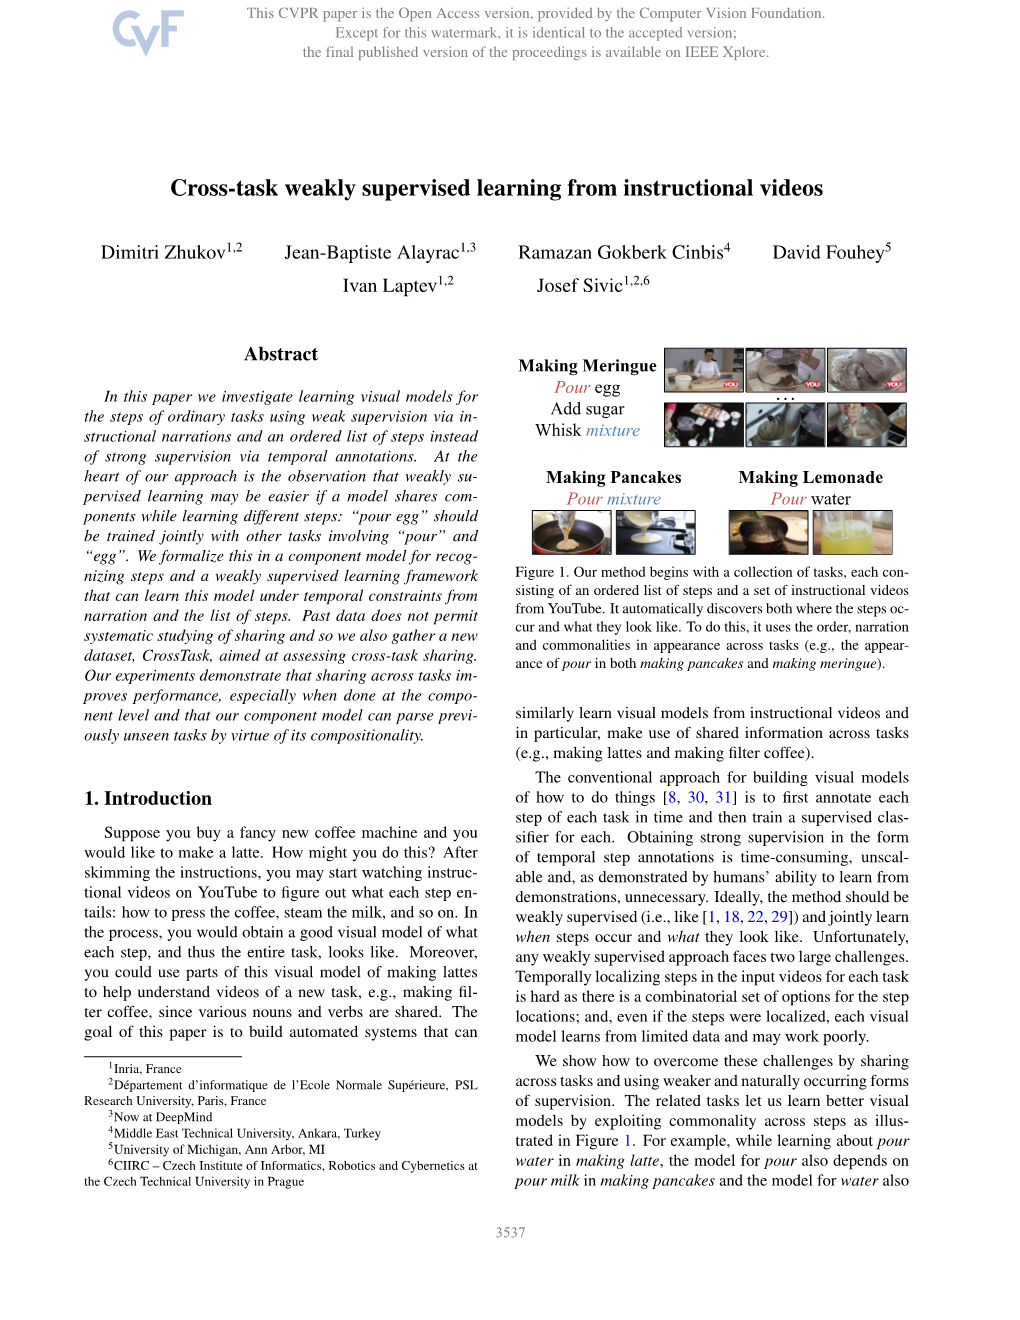 Cross-Task Weakly Supervised Learning from Instructional Videos